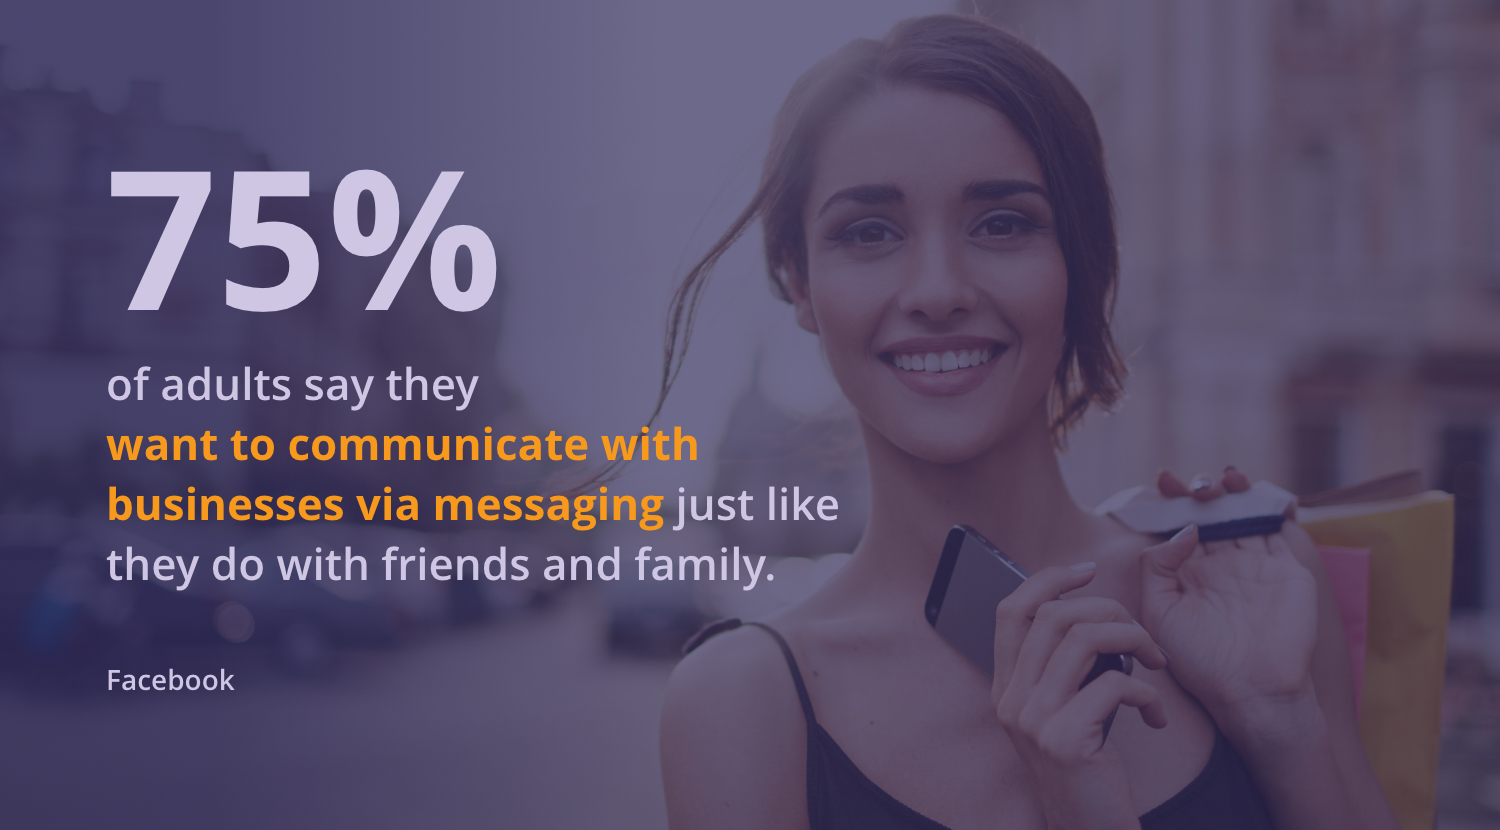 People want to communicate using messaging apps